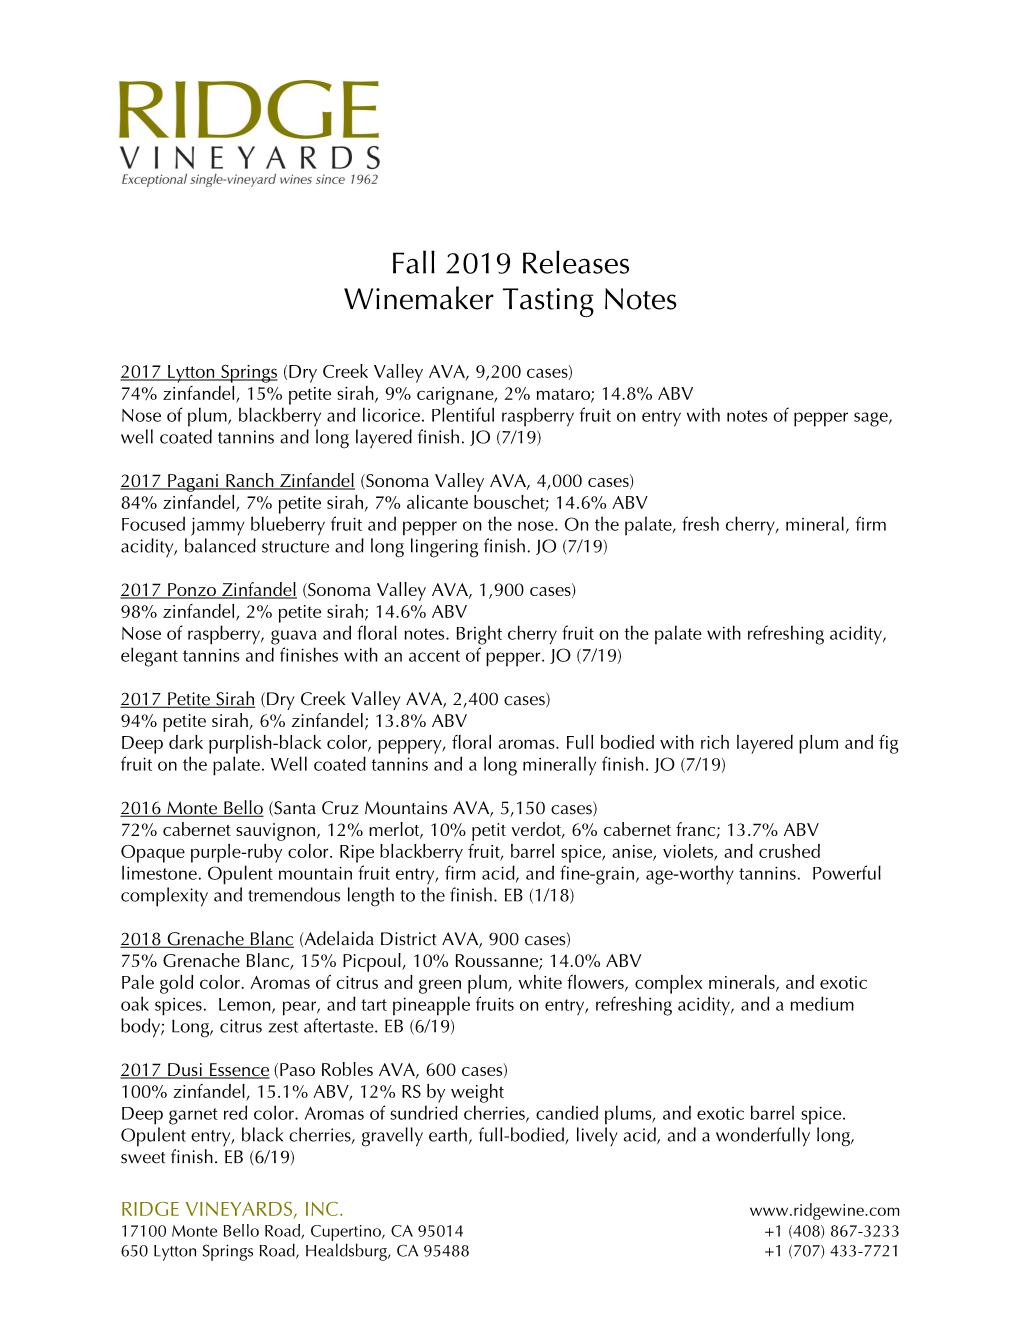 Fall 2019 Releases Winemaker Tasting Notes